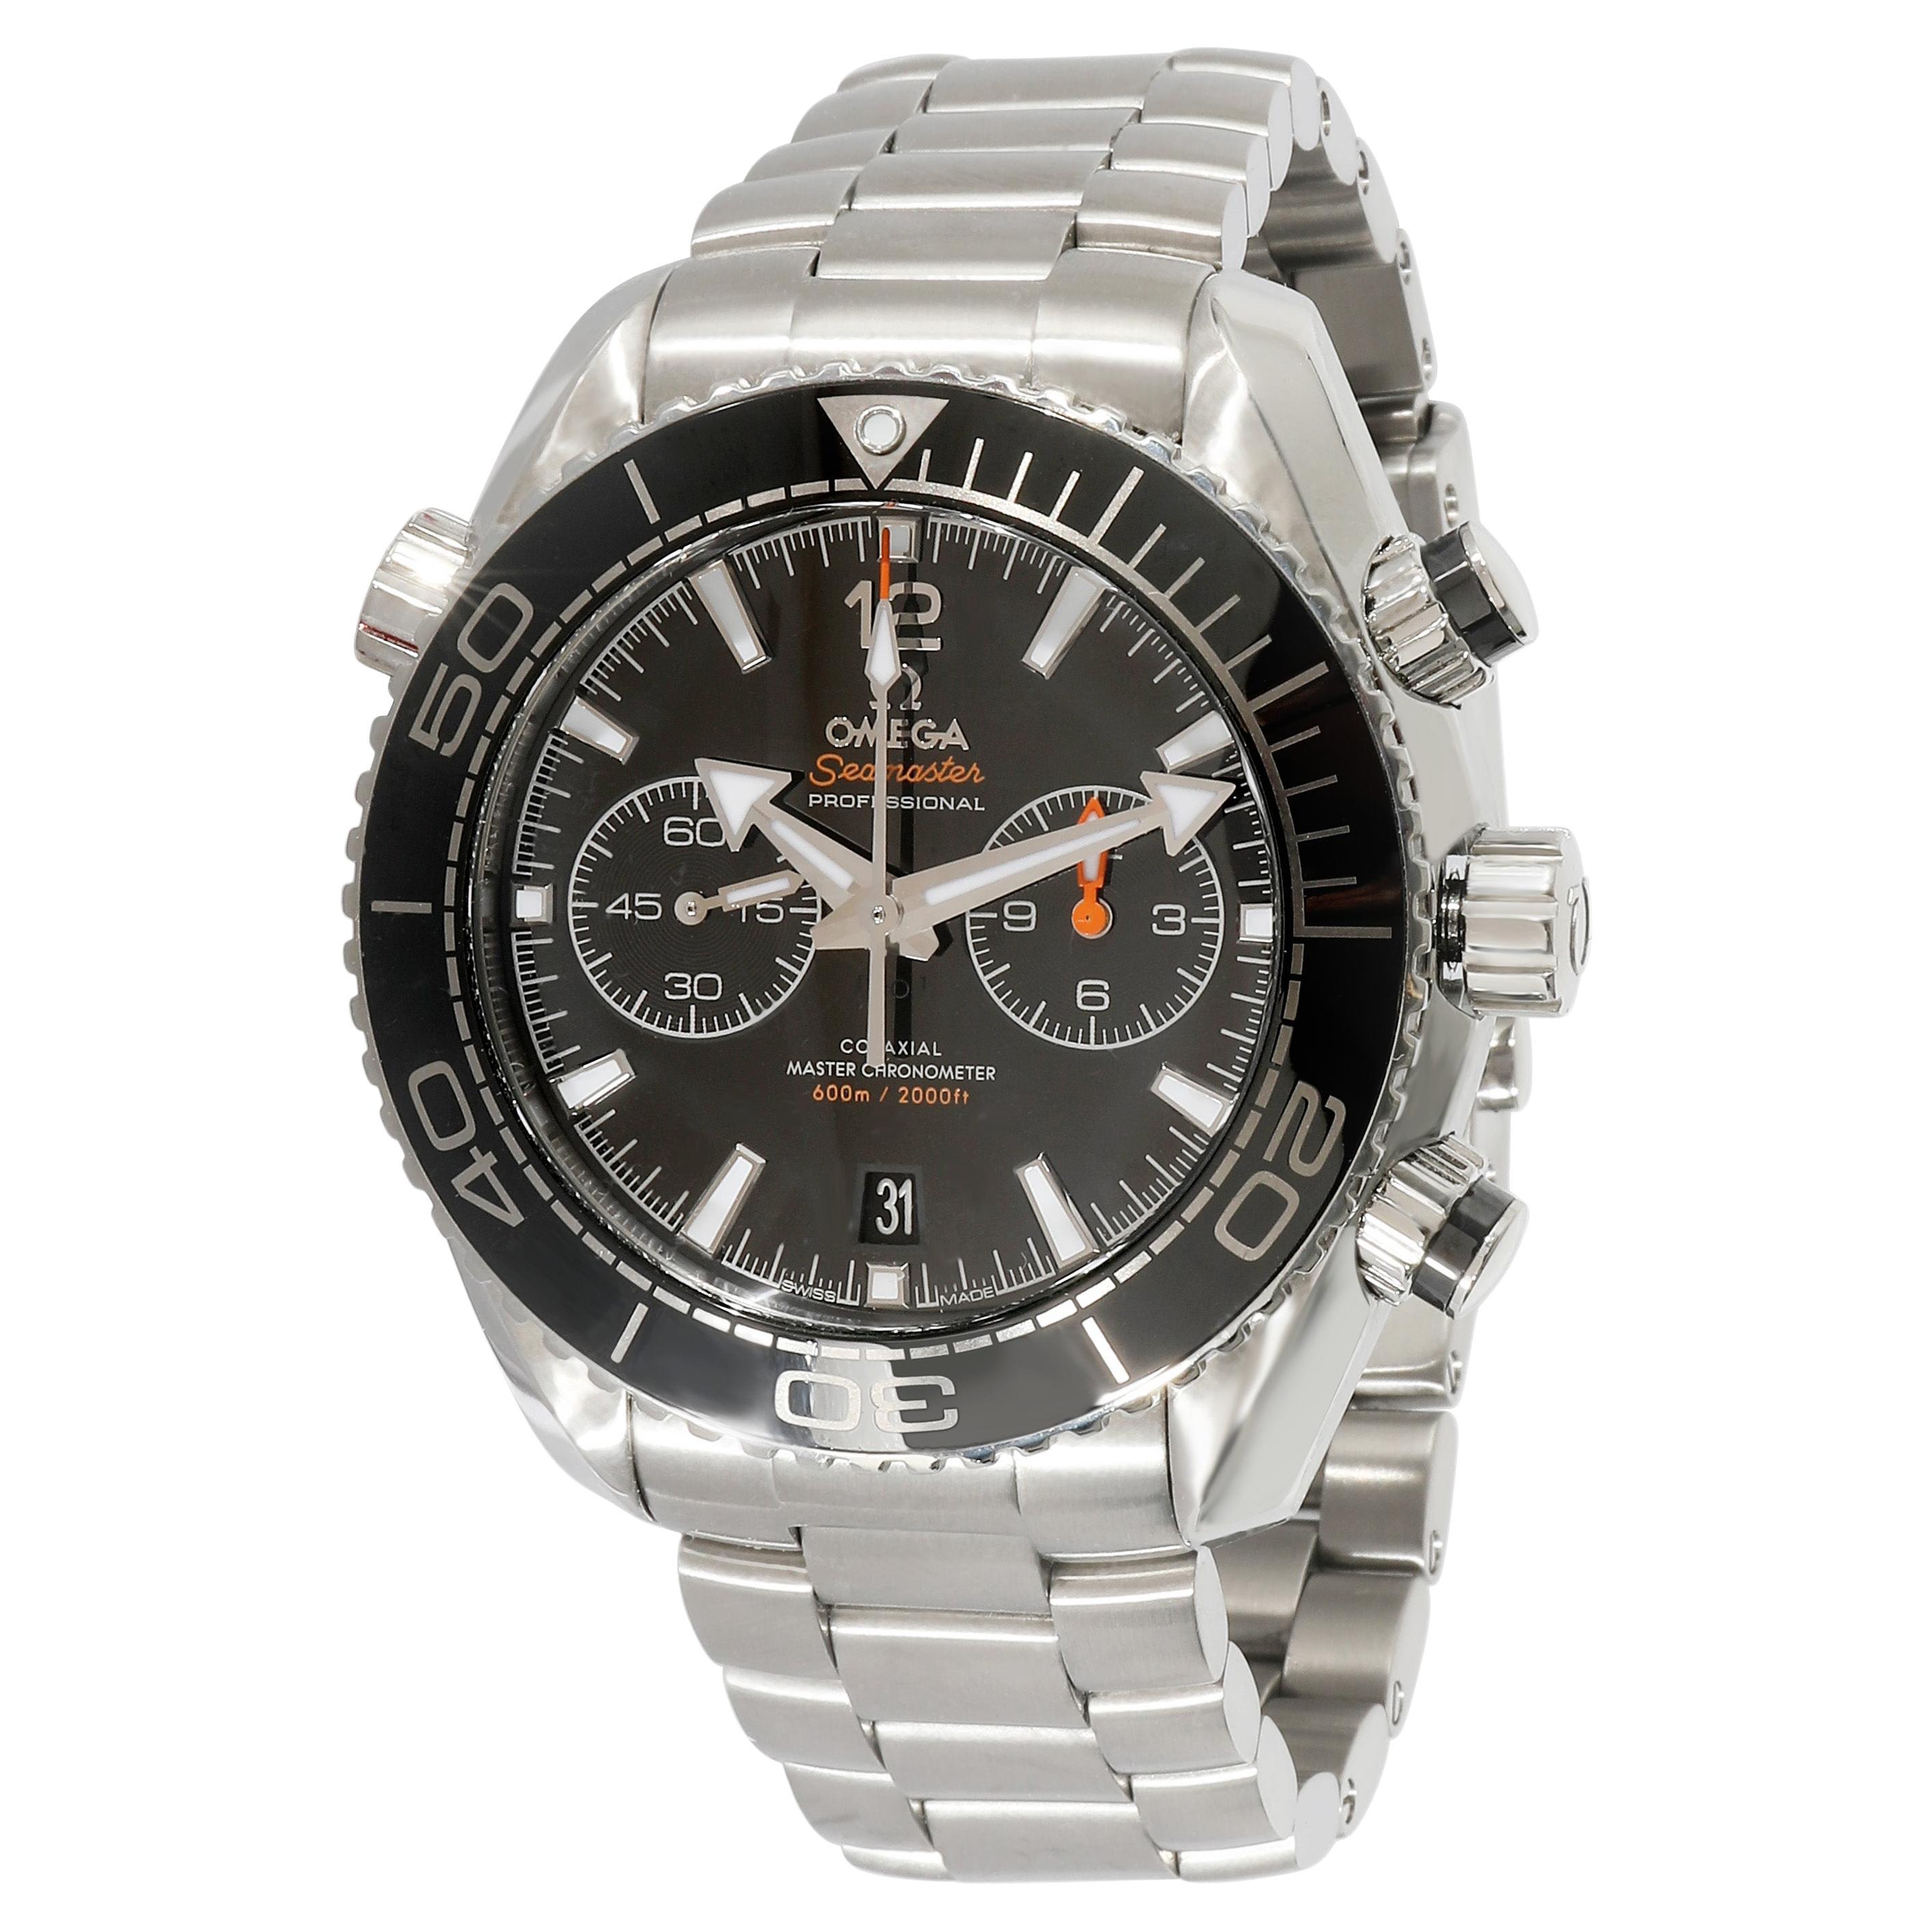 Omega Seamaster Planet Ocean 215.30.46.51.01.001 Men's Watch in  Stainless Steel For Sale